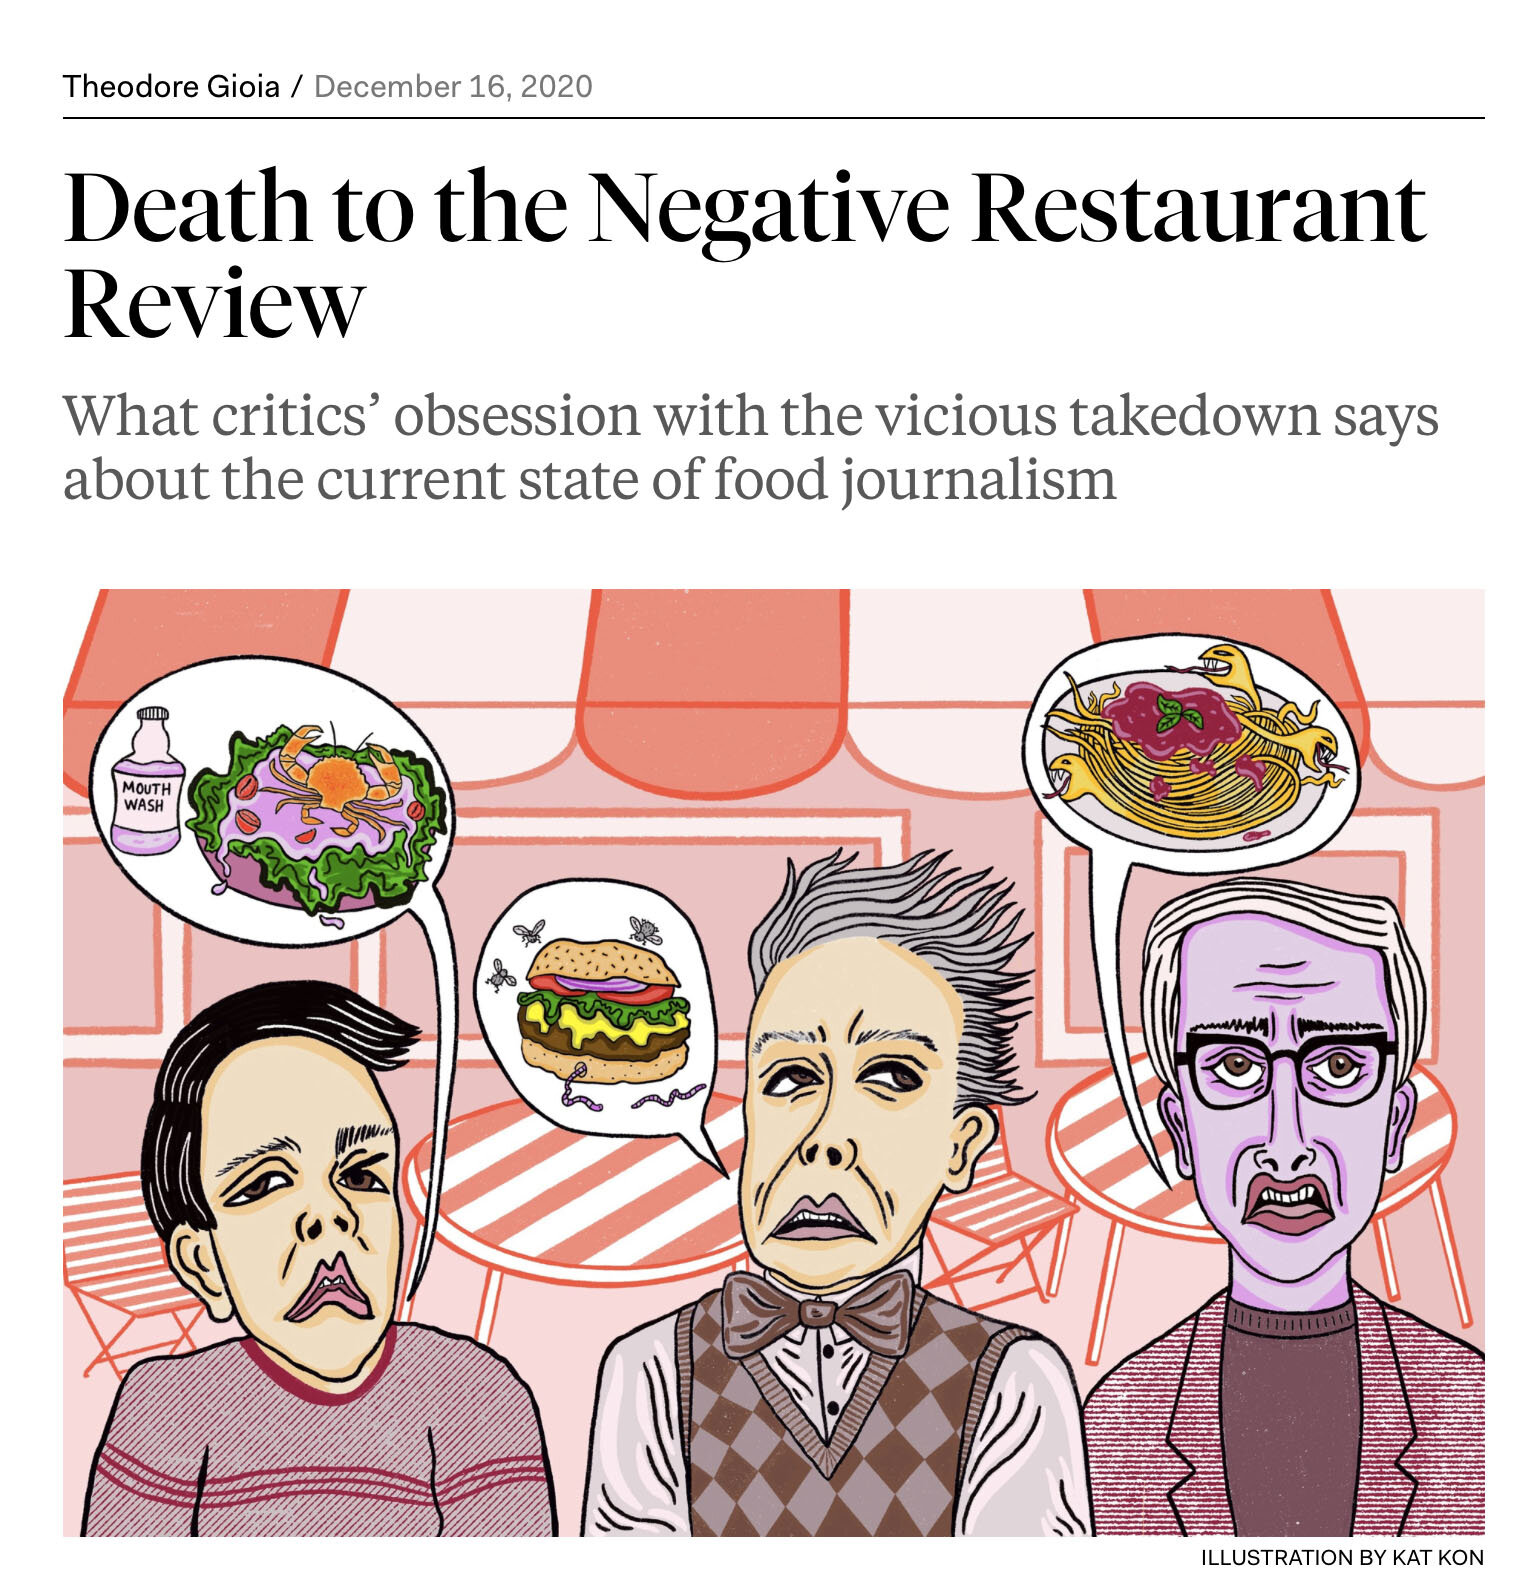  Illustration for The New Republic for an article about The Death of the Negative Food Review. AD Robert A. Di Ieso 